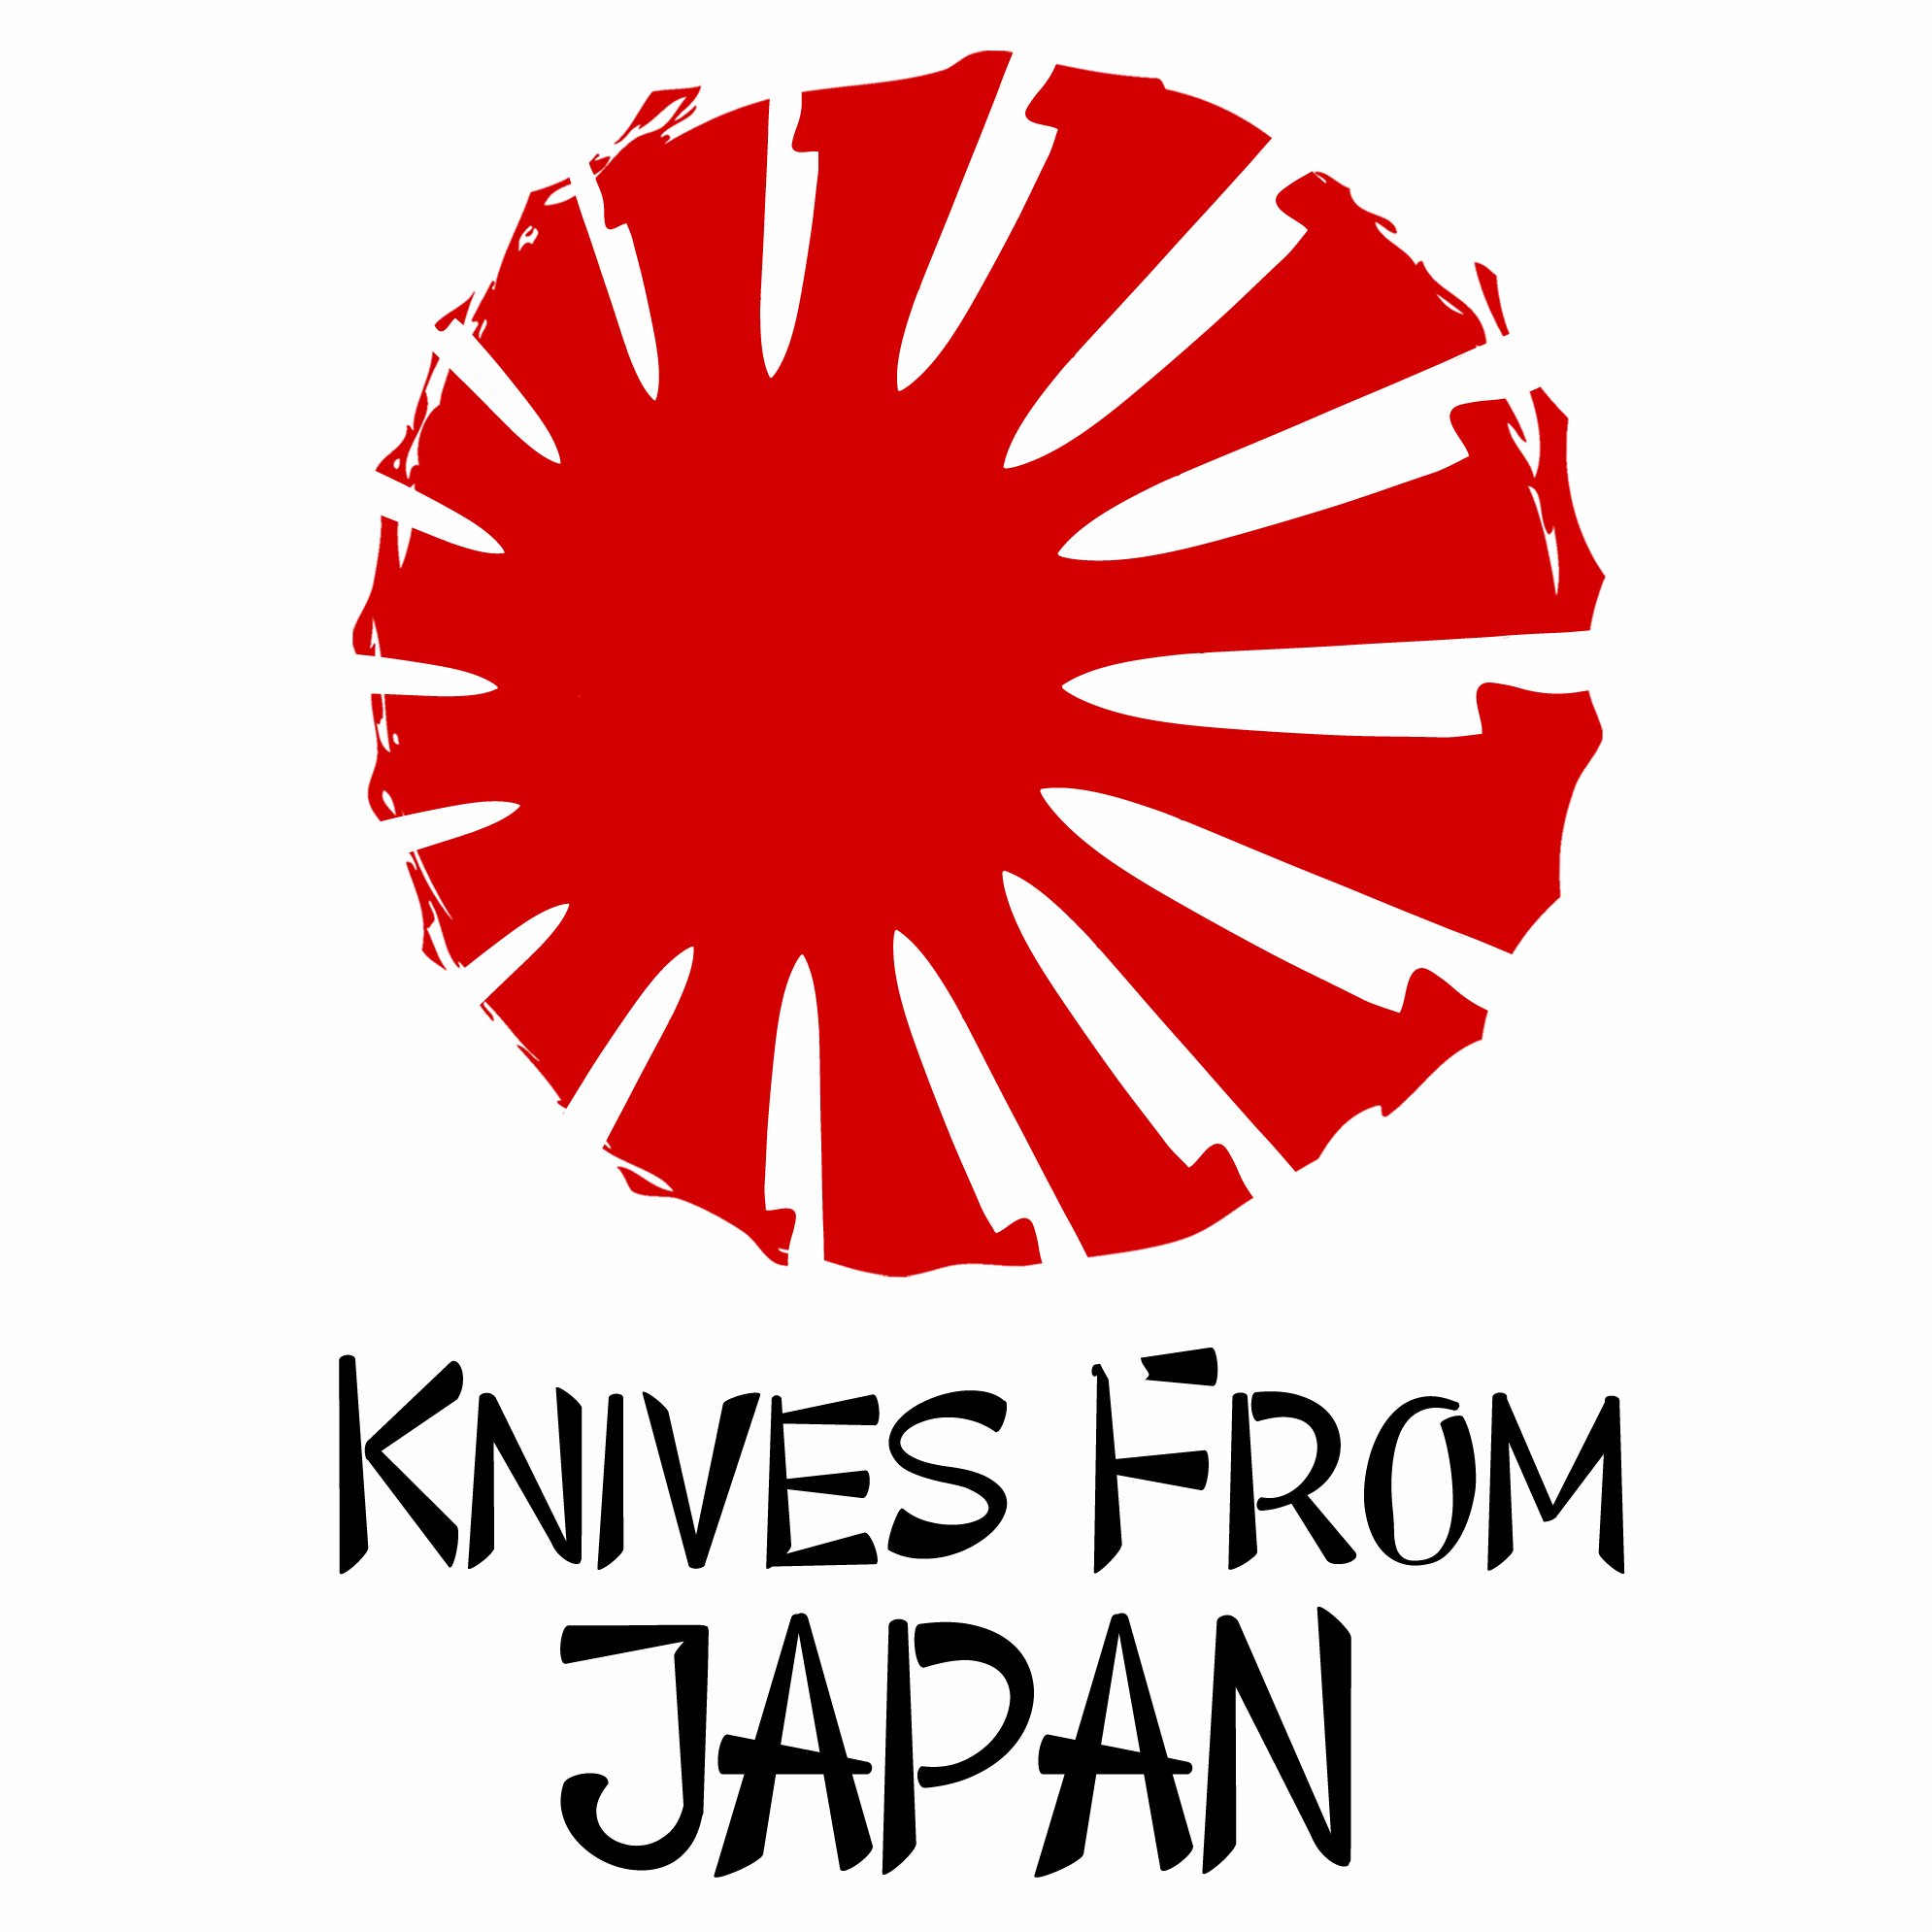 Knives From Japan is an online store that sells high quality Japanese knives at special prices.